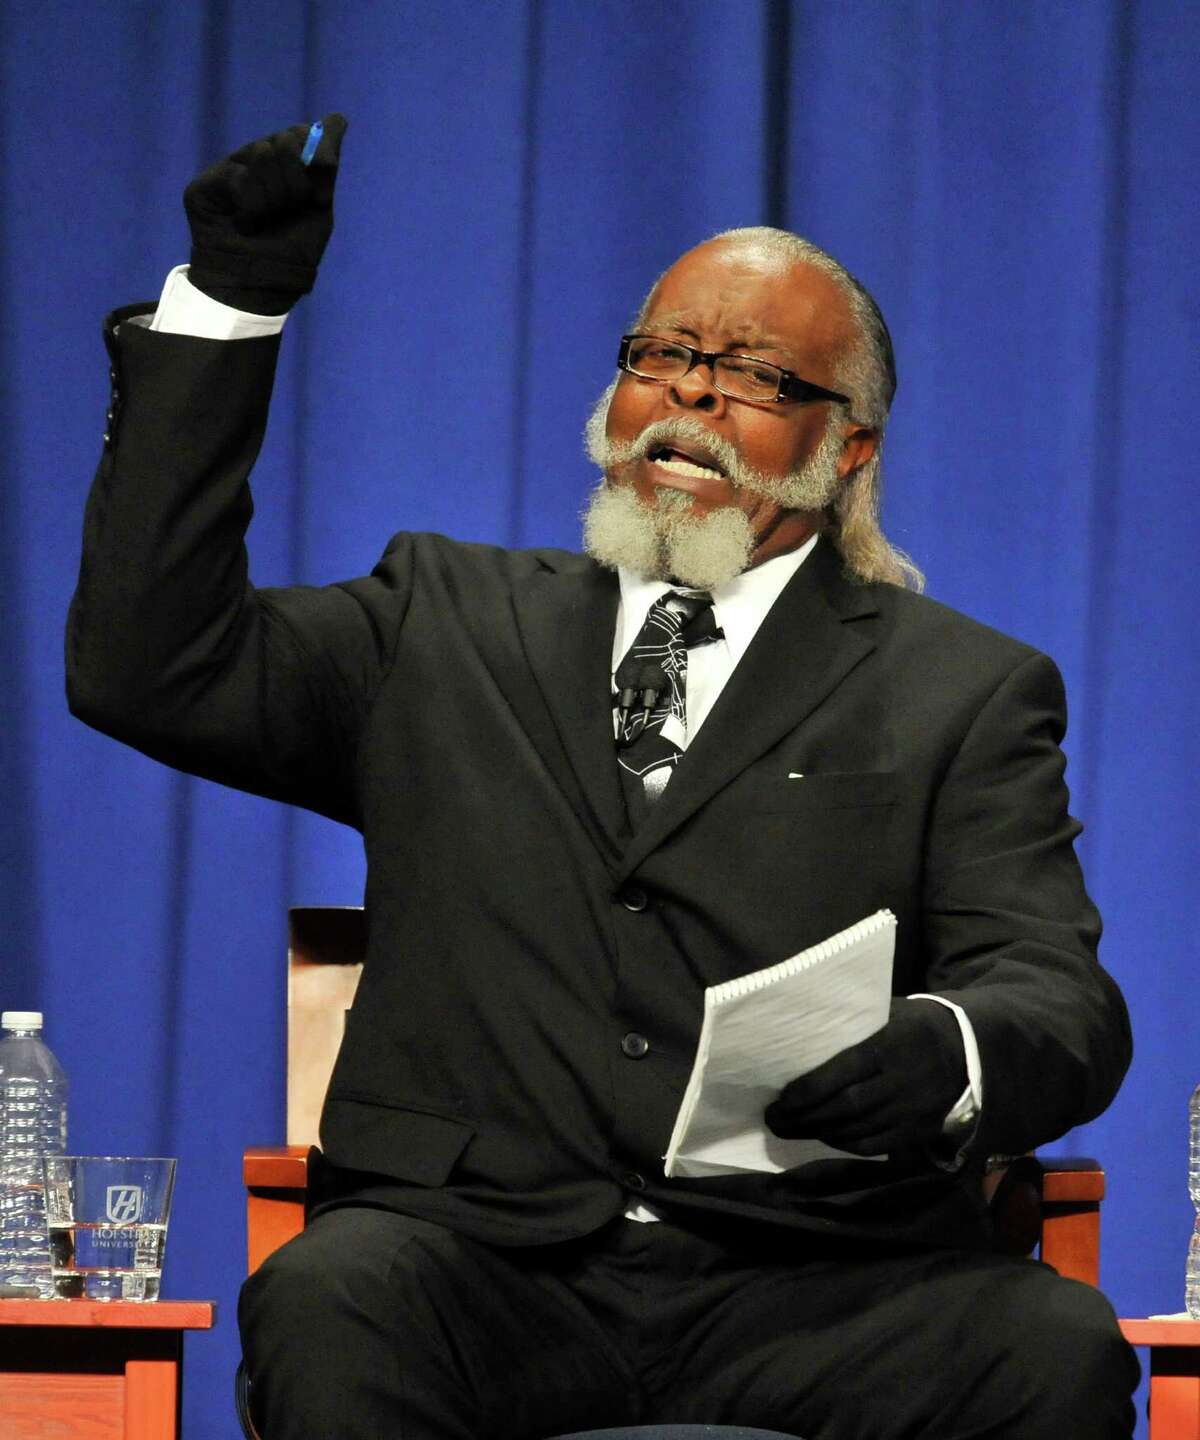 Jimmy McMillan, candidate for Rent is 2 Damn High party makes a point during the 2010 New York State Gubernatorial debate held at Hoftstra University in Hempstead, N.Y. on Monday, Oct. 18, 2010. McMillan, who was trying to run for governor on the Rent is Too Damn High party, had his nominating petitions invalidated by the Board because they were photocopies rather than originals; and the state?s sole candidate trying to use a new matching funds campaign finance system has yet to request any money, raising questions about whether GOP Comptroller Candidate has raised money from enough donors. (AP Photo/Kathy Kmonicek)